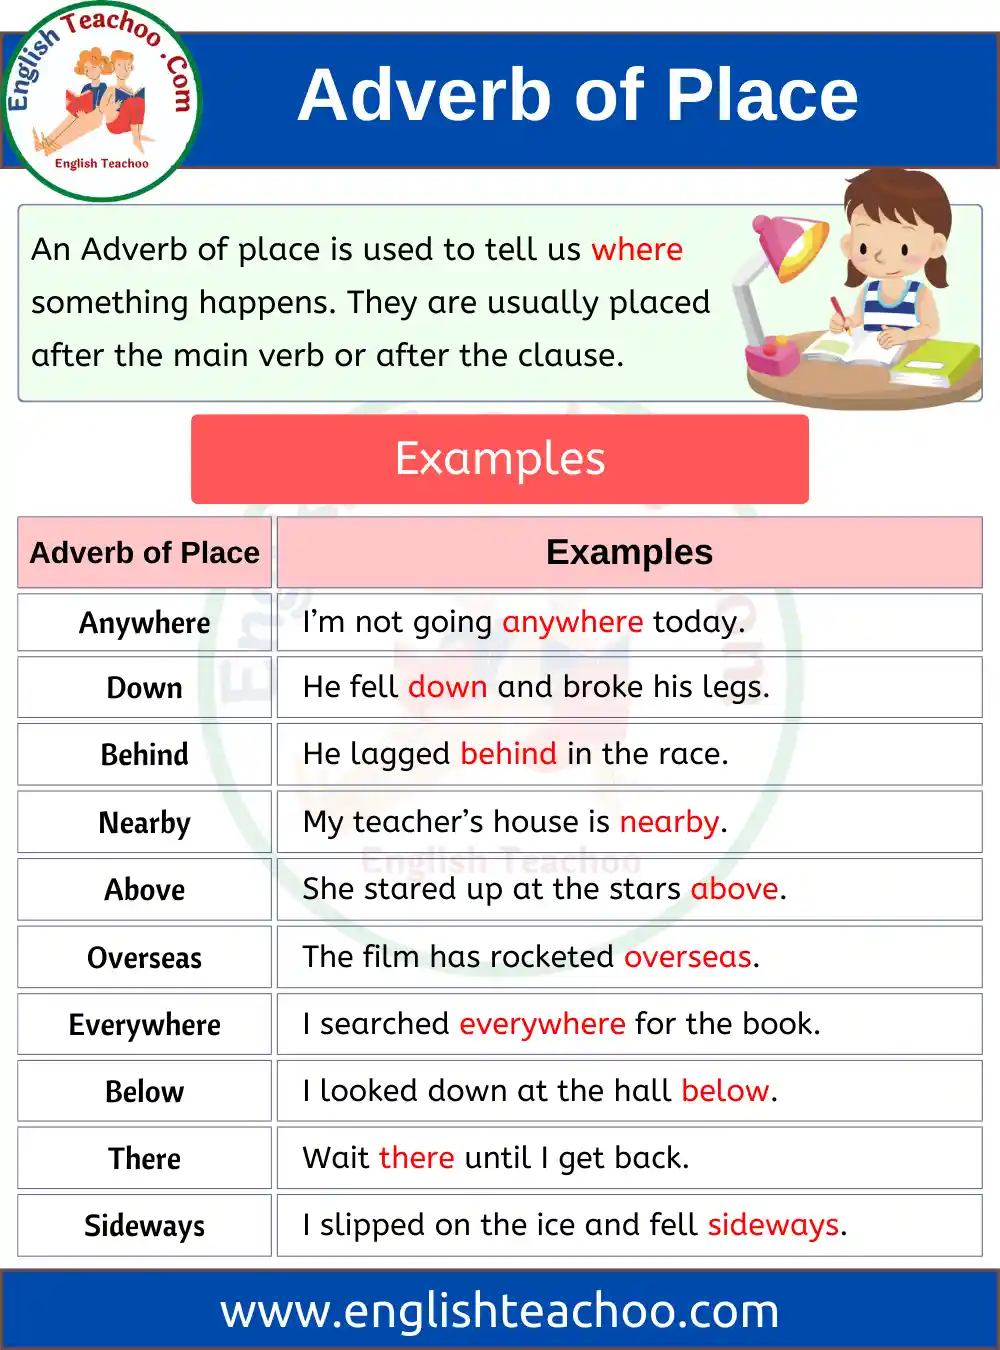 adverb-of-place-examples-in-sentences-englishteachoo